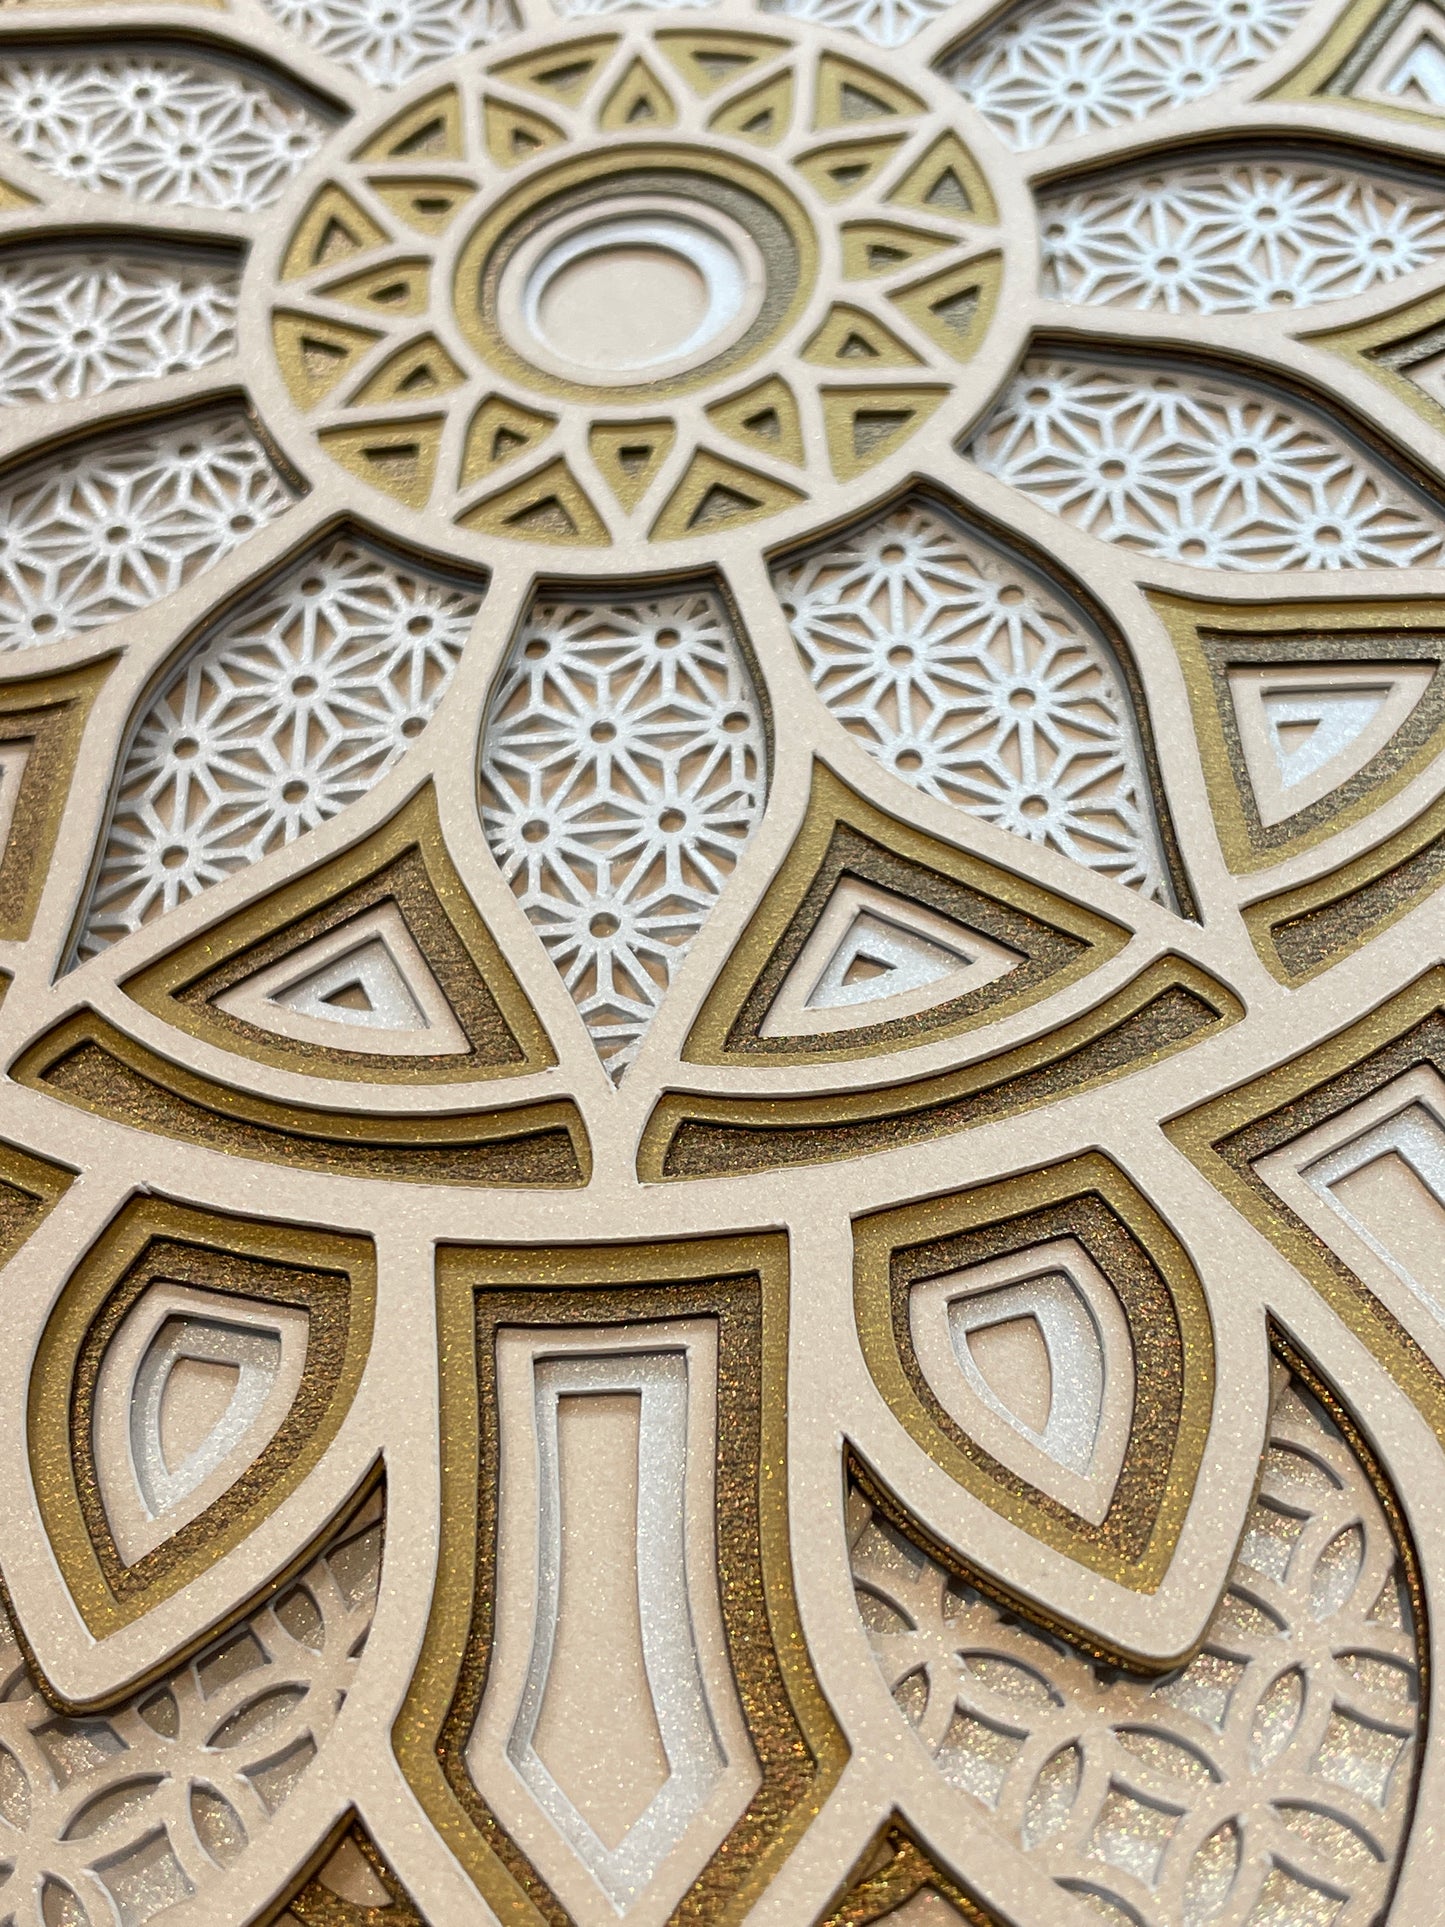 Close up image of 3d layered Mandala design instant download svg files by Home Stitchery Decor.  You can make this 3d Layered Mandala for Shadow boxes or separate the layers for all your Cricut Crafting needs.  Files can be sized up for CNC or Laser Cut Manadalas